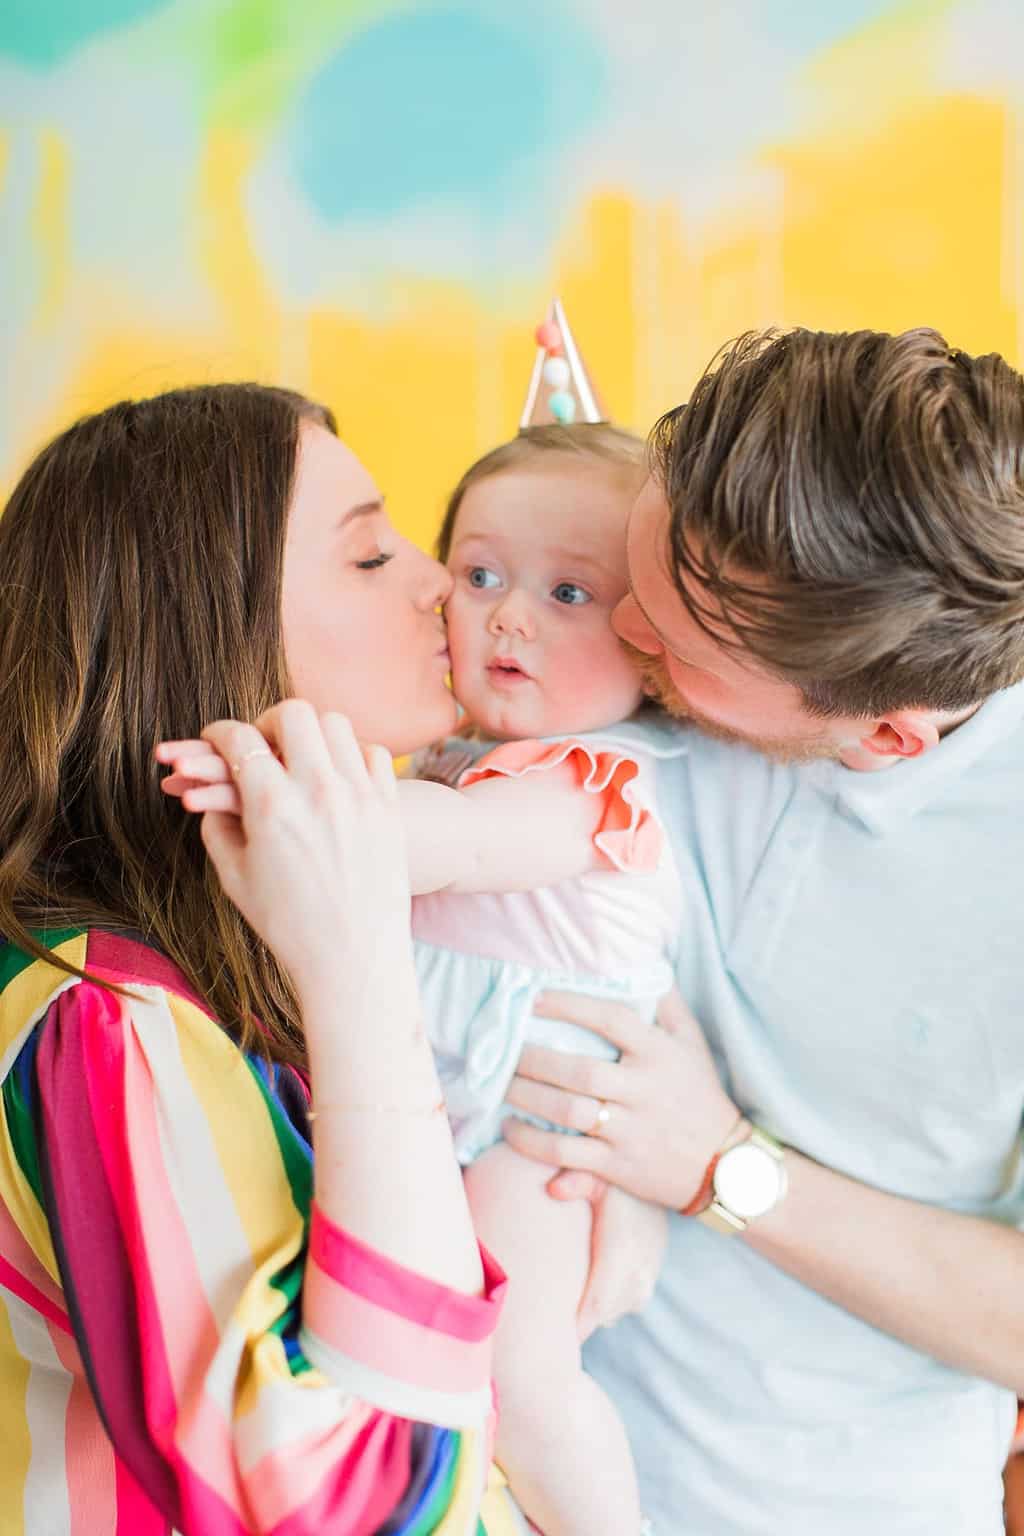 can't believe she's one! - Gwen Turns One + Her First Birthday Party Ideas! by top Houston Lifestyle Blogger Ashley Rose of Sugar & Cloth #party #partyideas #firstbirthday #baby #birthday #howto #diy #budget #colorful